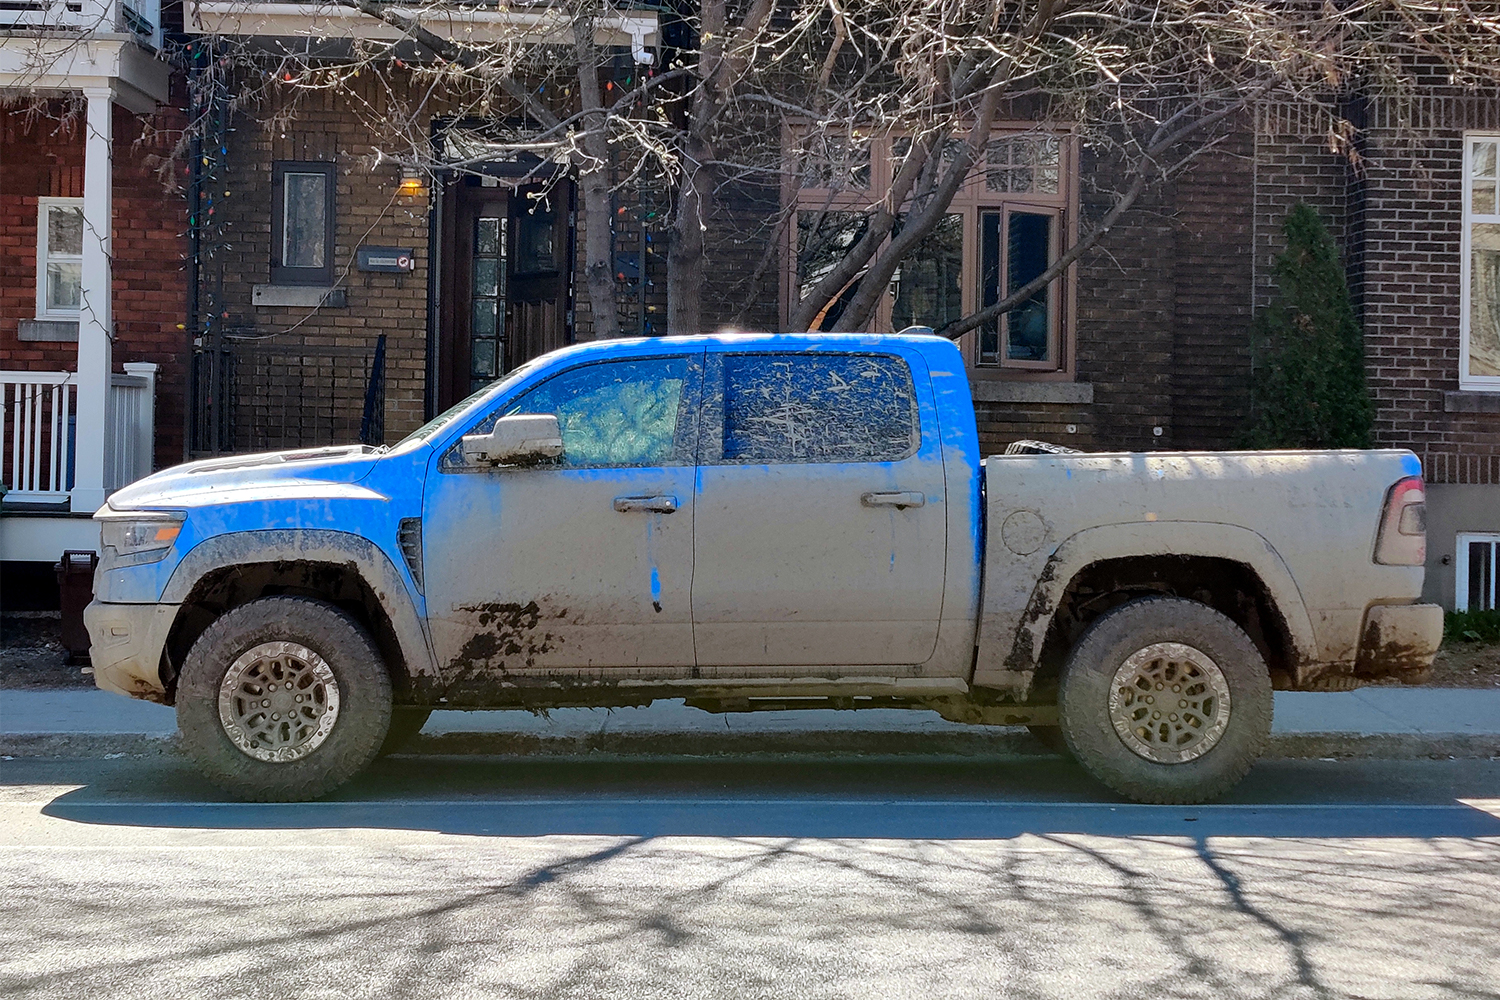 A blue 2021 Ram 1500 TRX pickup truck covered in mud parked on a city street